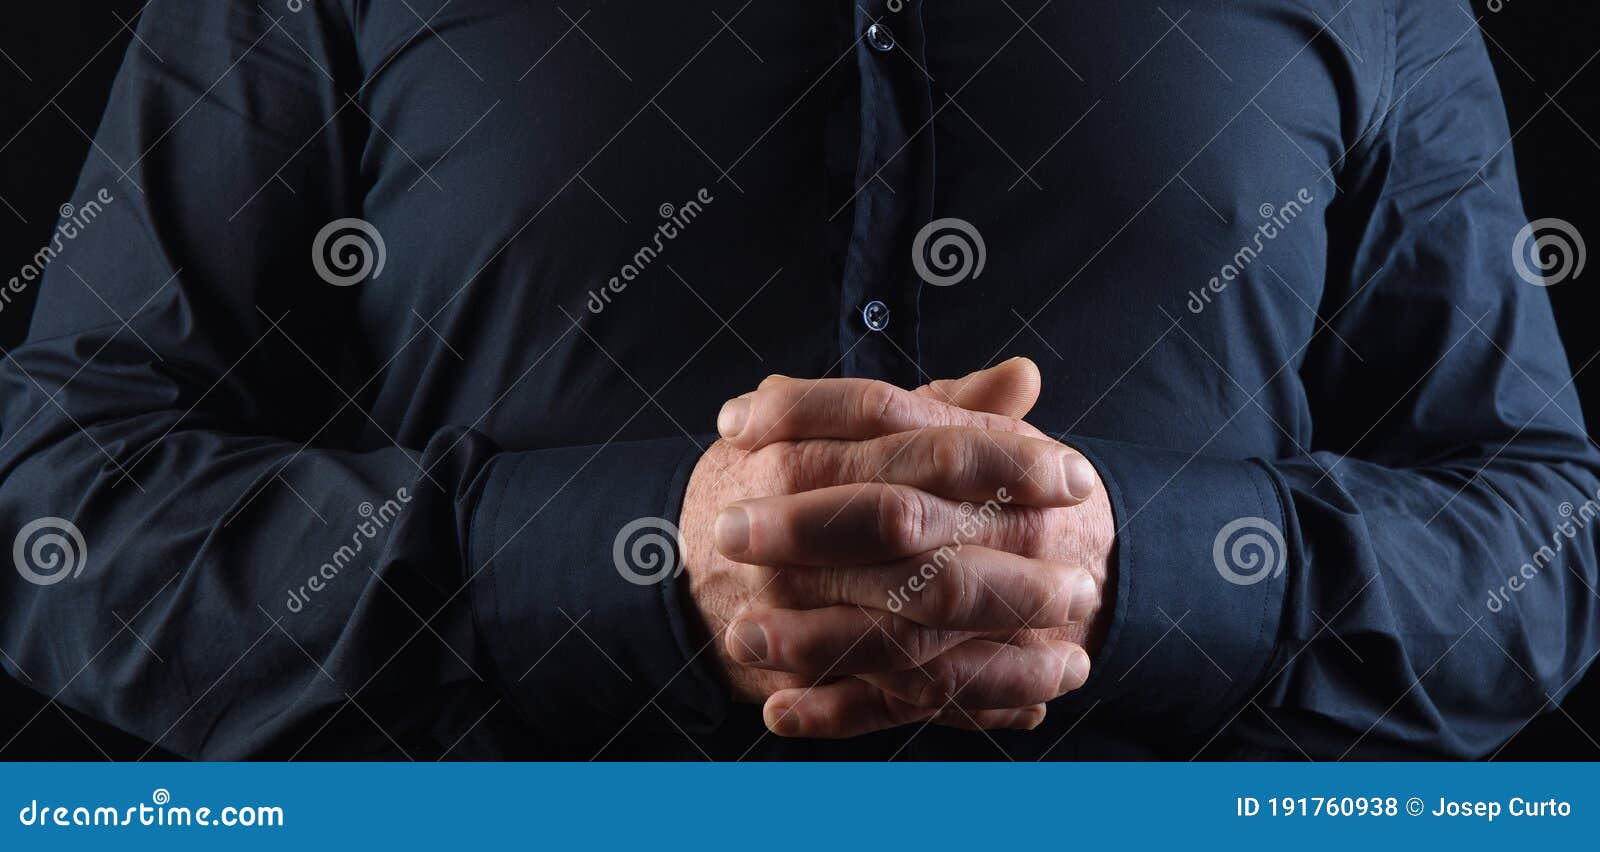 a man with his fingers interlocked on black